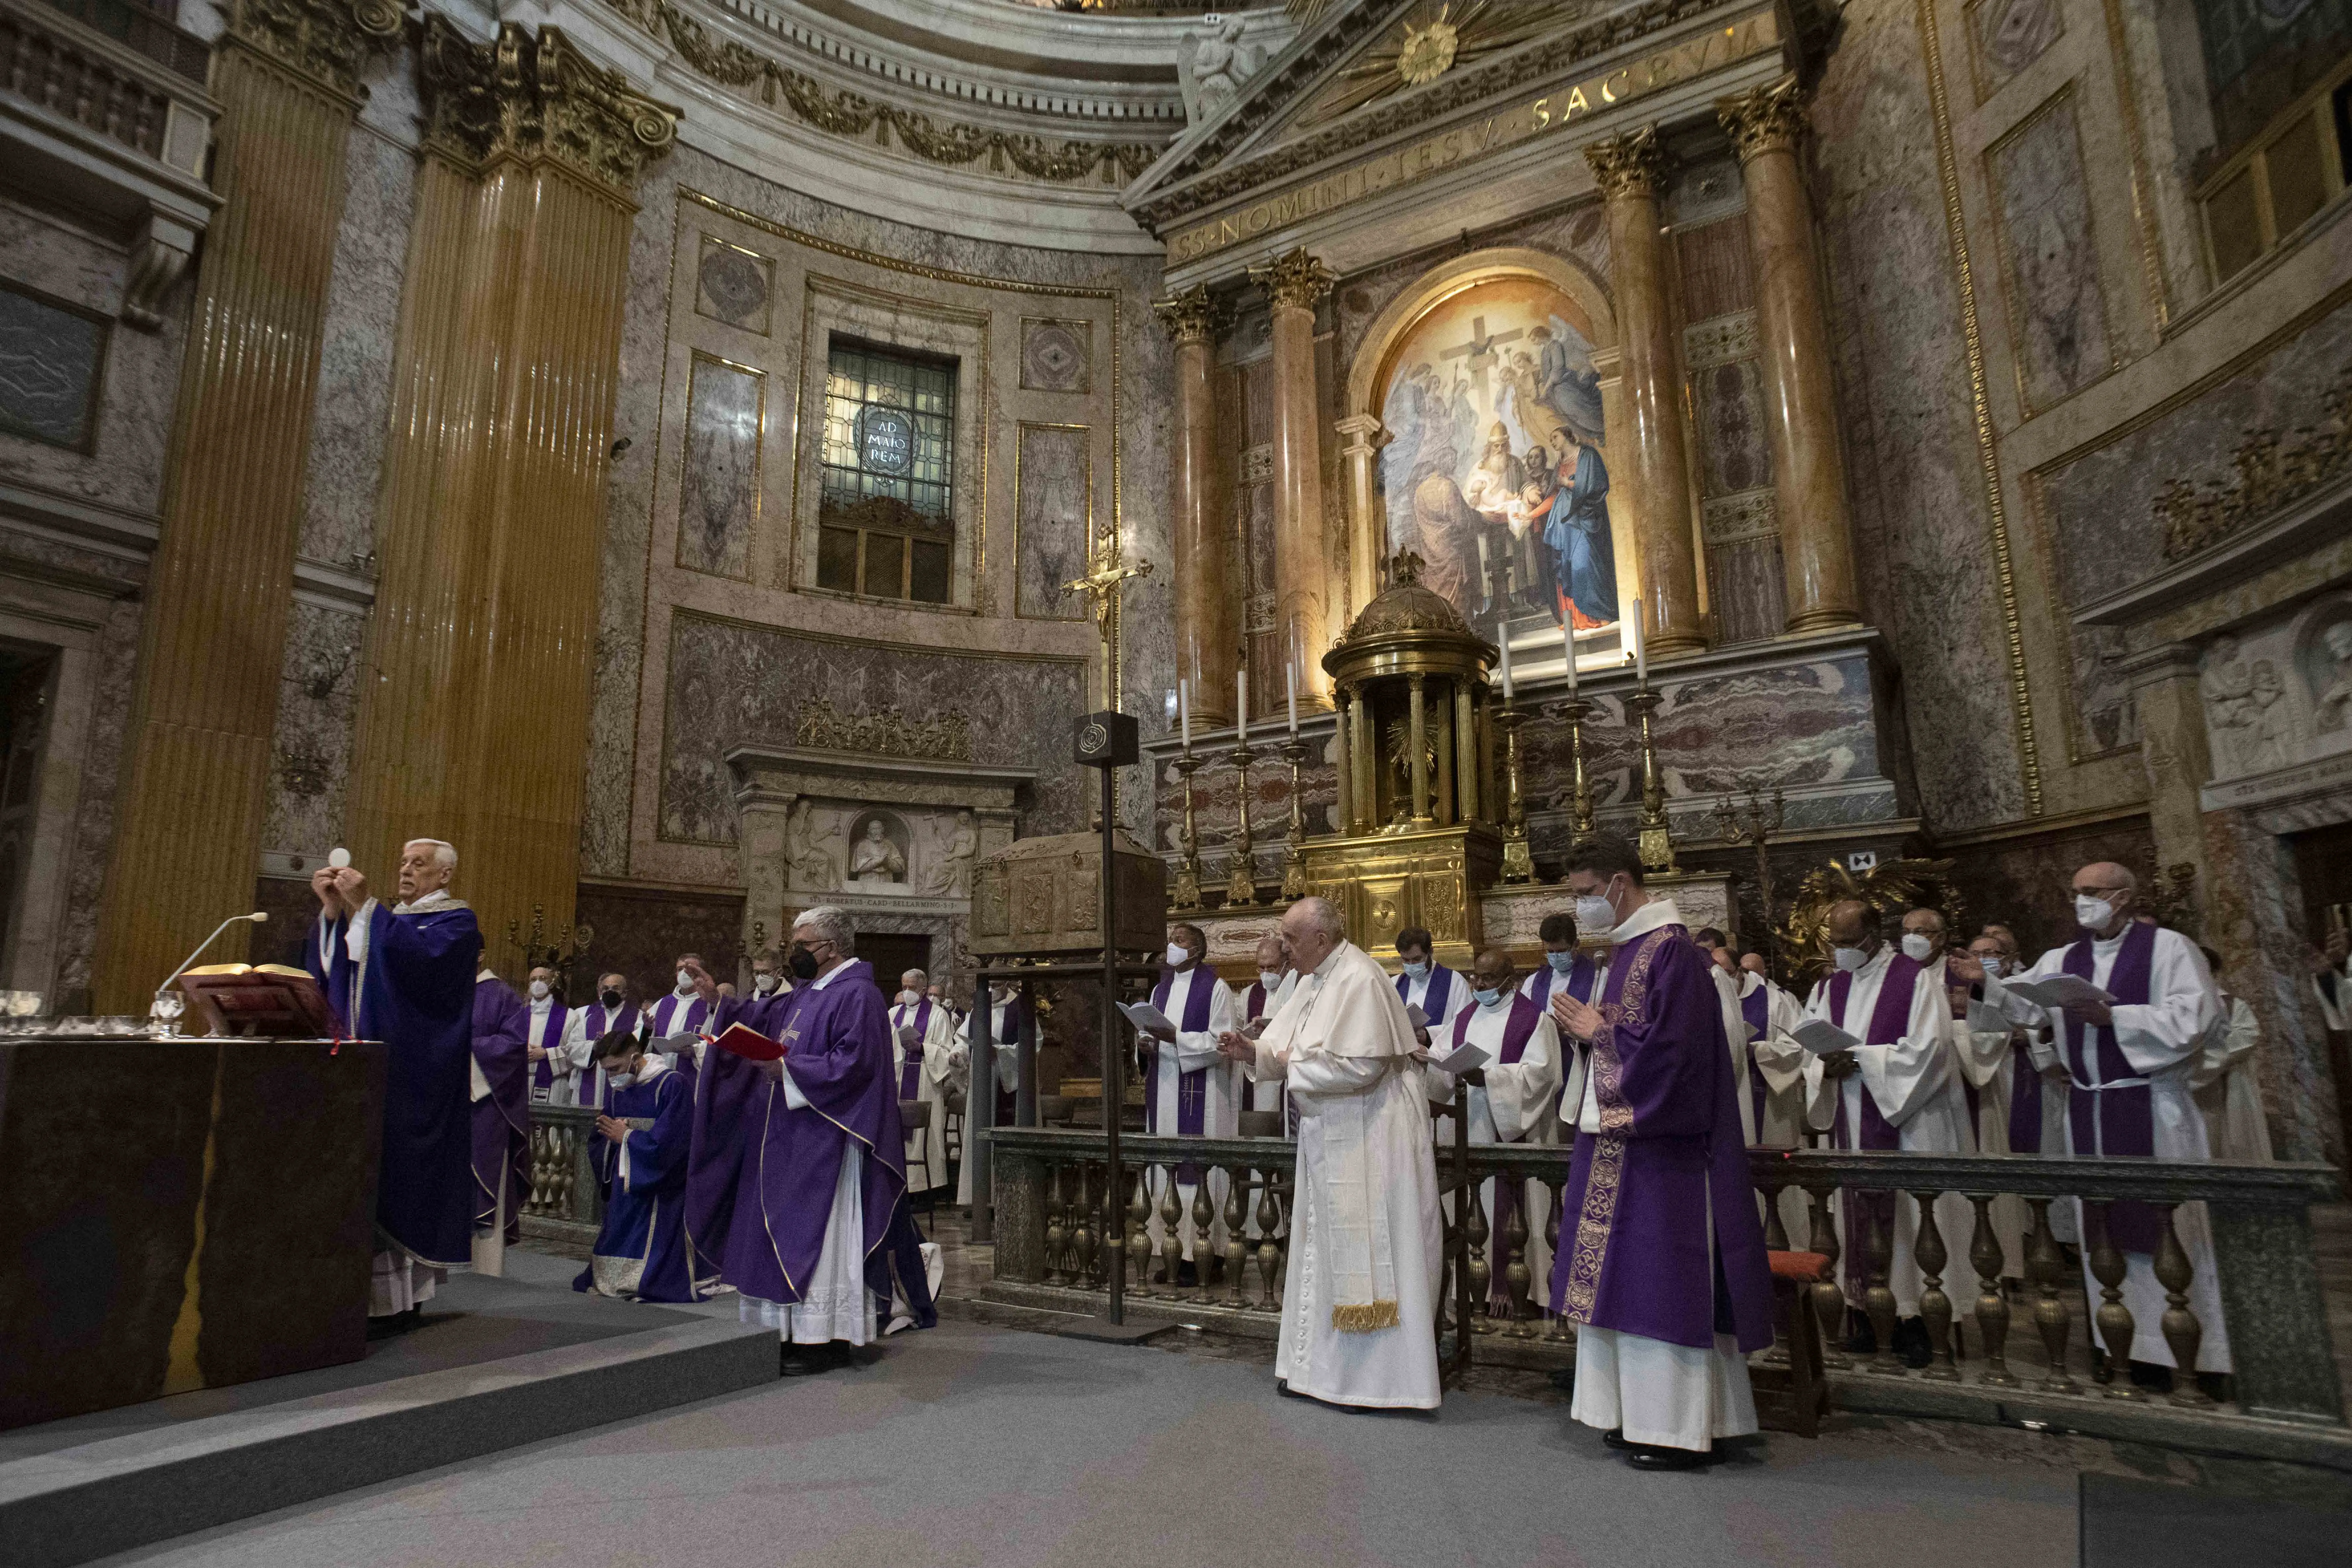 Father Arturo Sosa, Superior General of the Society of Jesus, says a Mass commemorating the 400th anniversary of the canonization of Saints Ignatius of Loyola, Francis Xavier, Teresa of Avila, Philip Neri, and Isidore the Farmer, with Pope Francis concelebrating, at the Church of the Gesù in Rome, March 12, 2022.?w=200&h=150